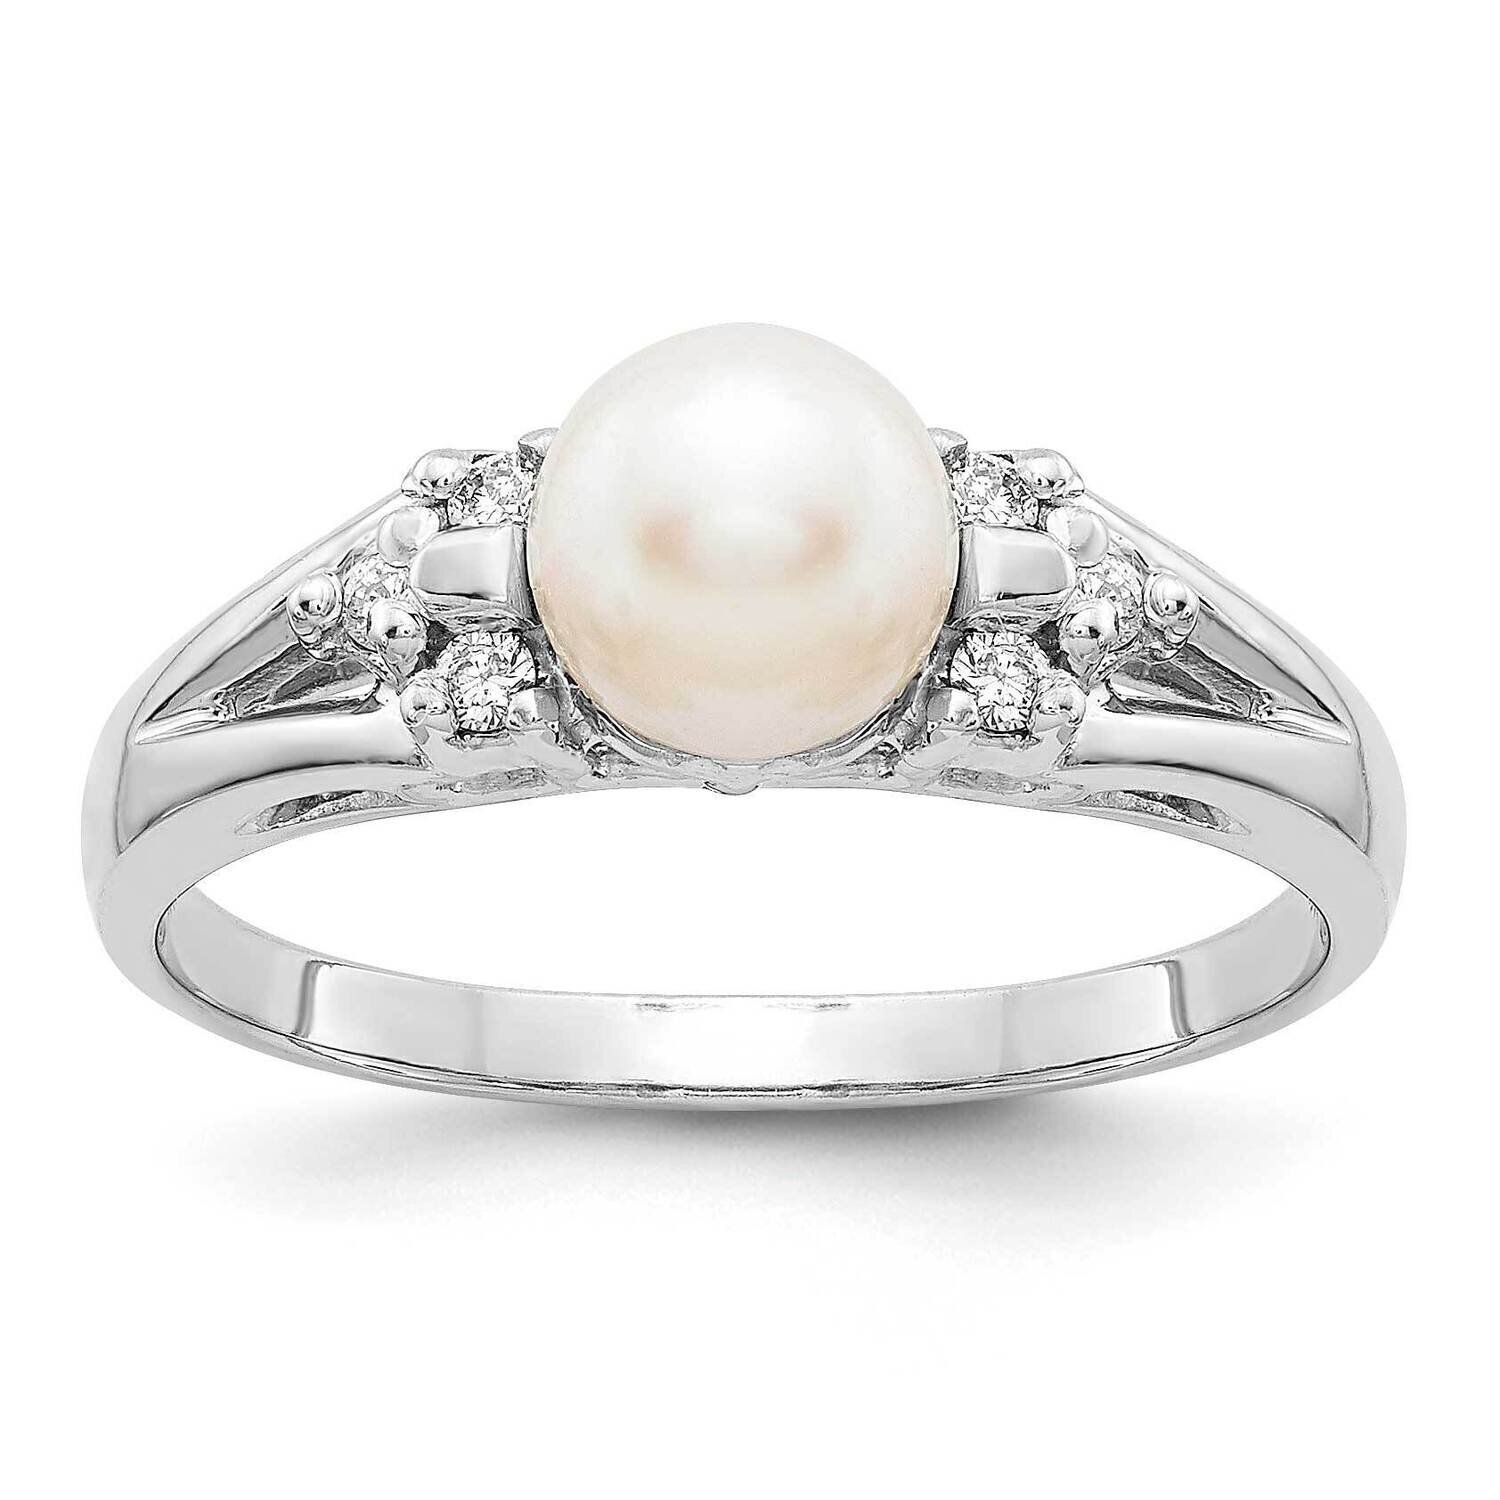 6mm Fw Cultured Pearl Aaa Diamond Ring 14k White Gold Y4389PL/AAA